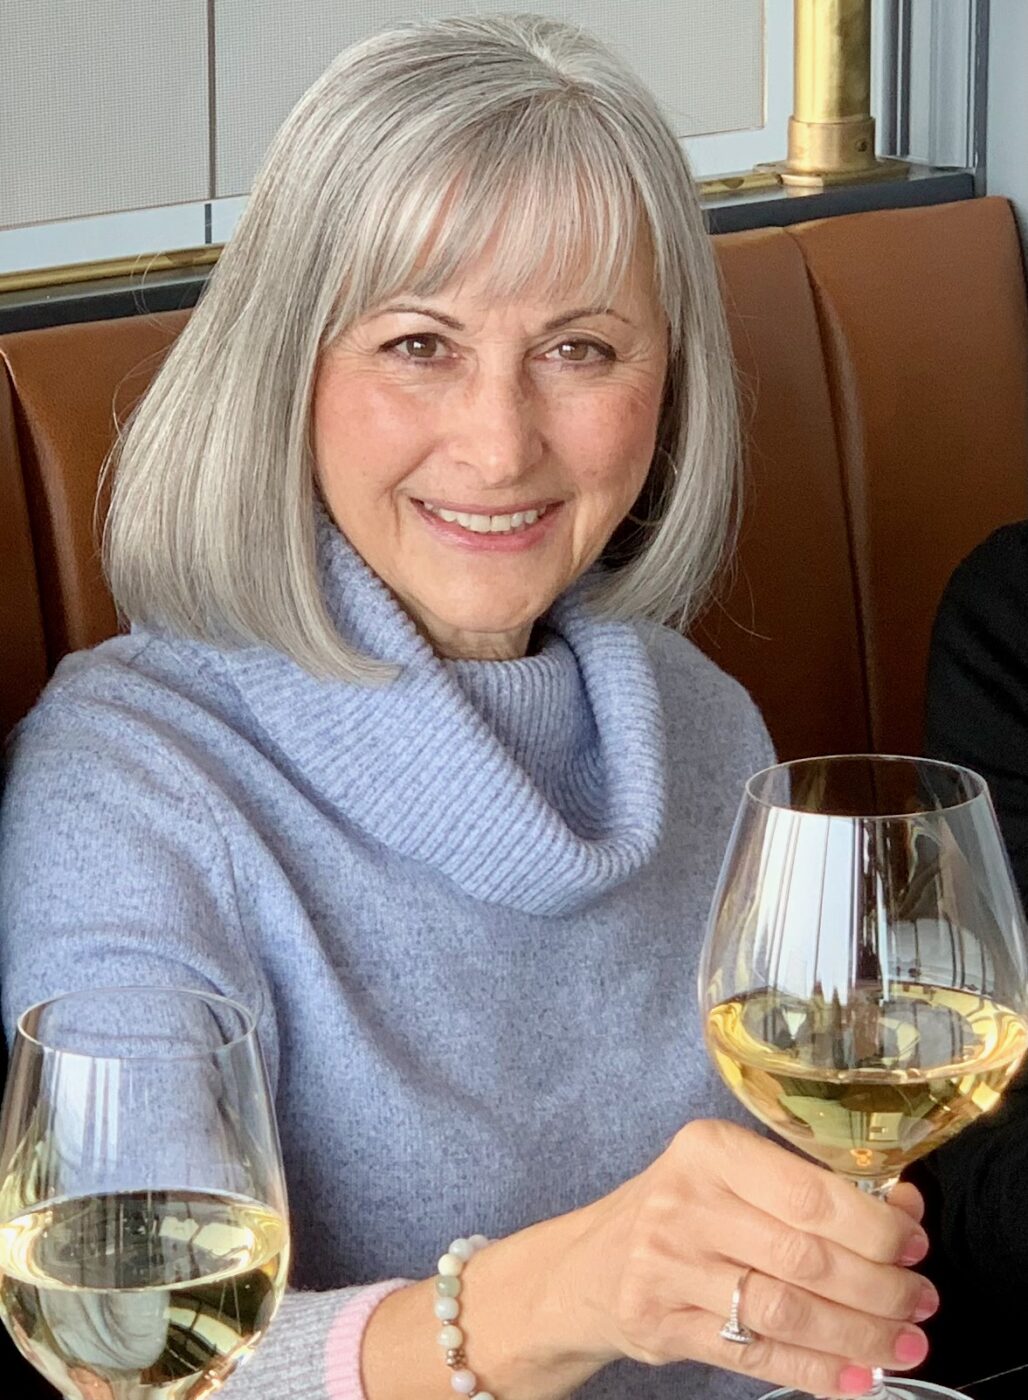 Woman in a light blue cowl neck sweater holding up a glass of white wine. She is smiling and has blue eues and grey hair with bangs.